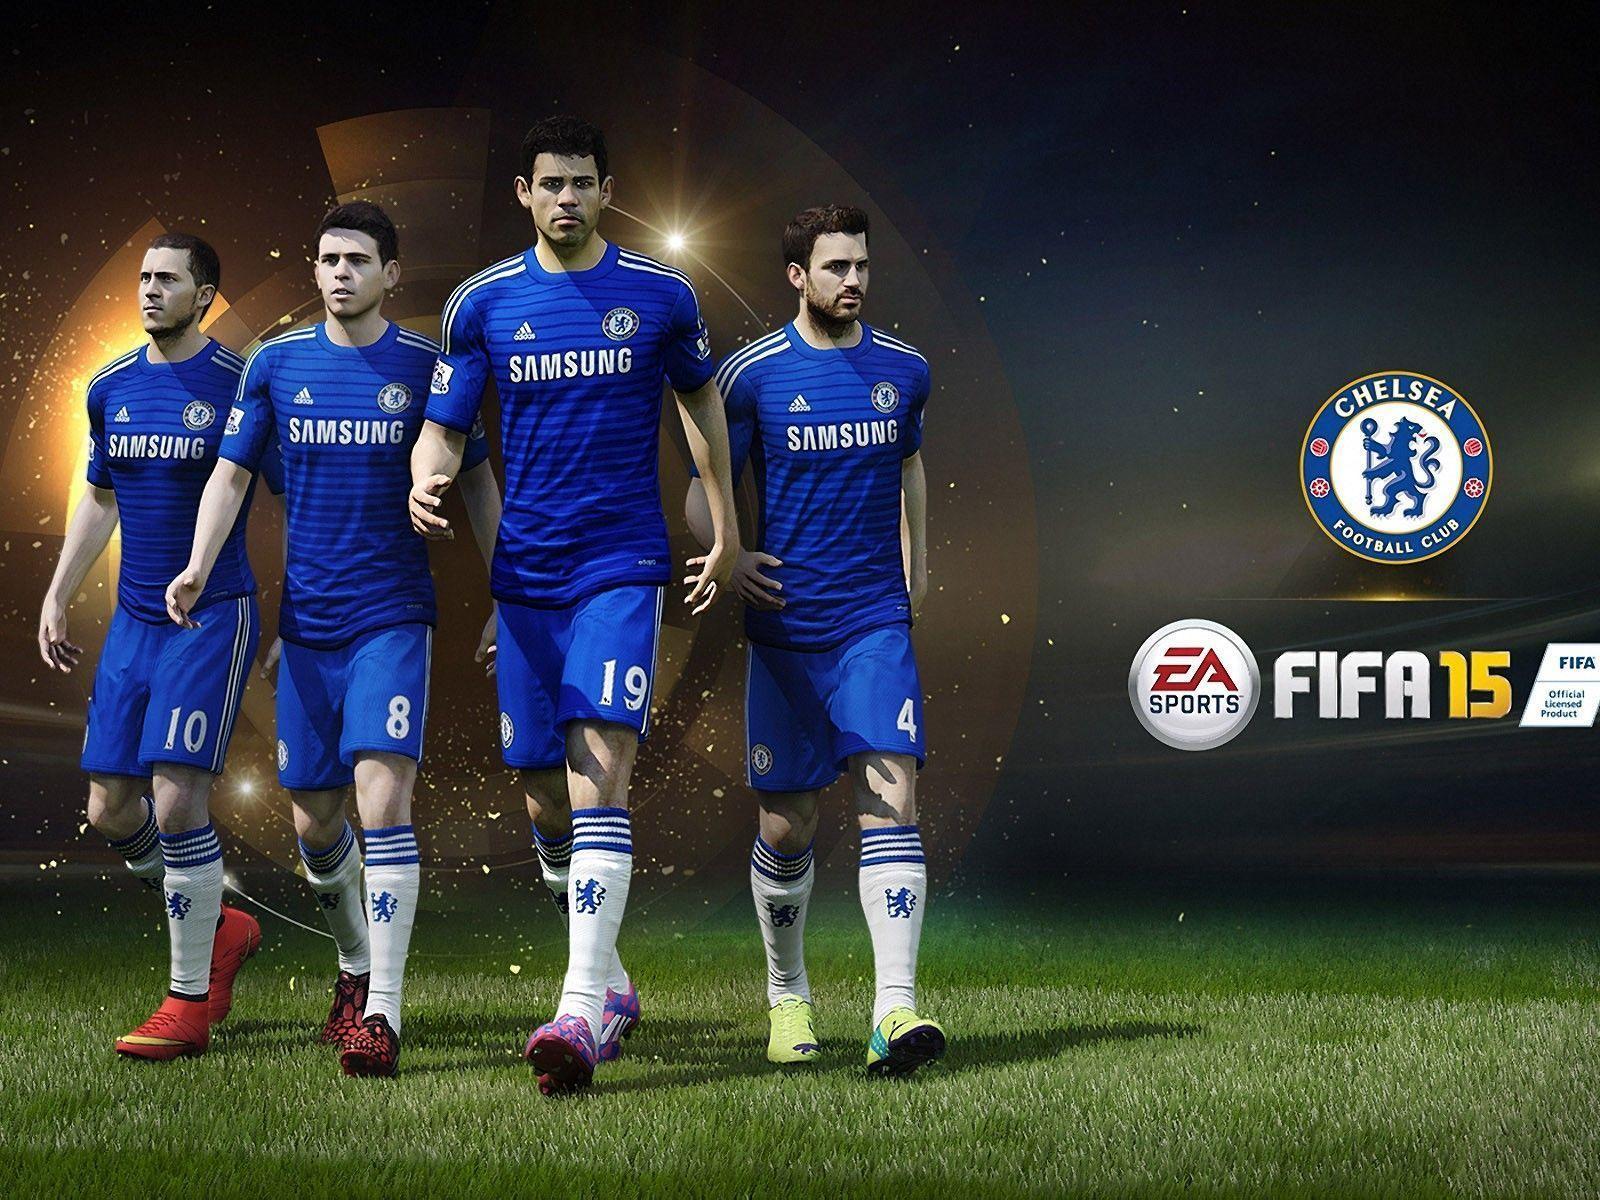 FIFA 15 Chelsea FC Poster Wallpaper Wide or HD